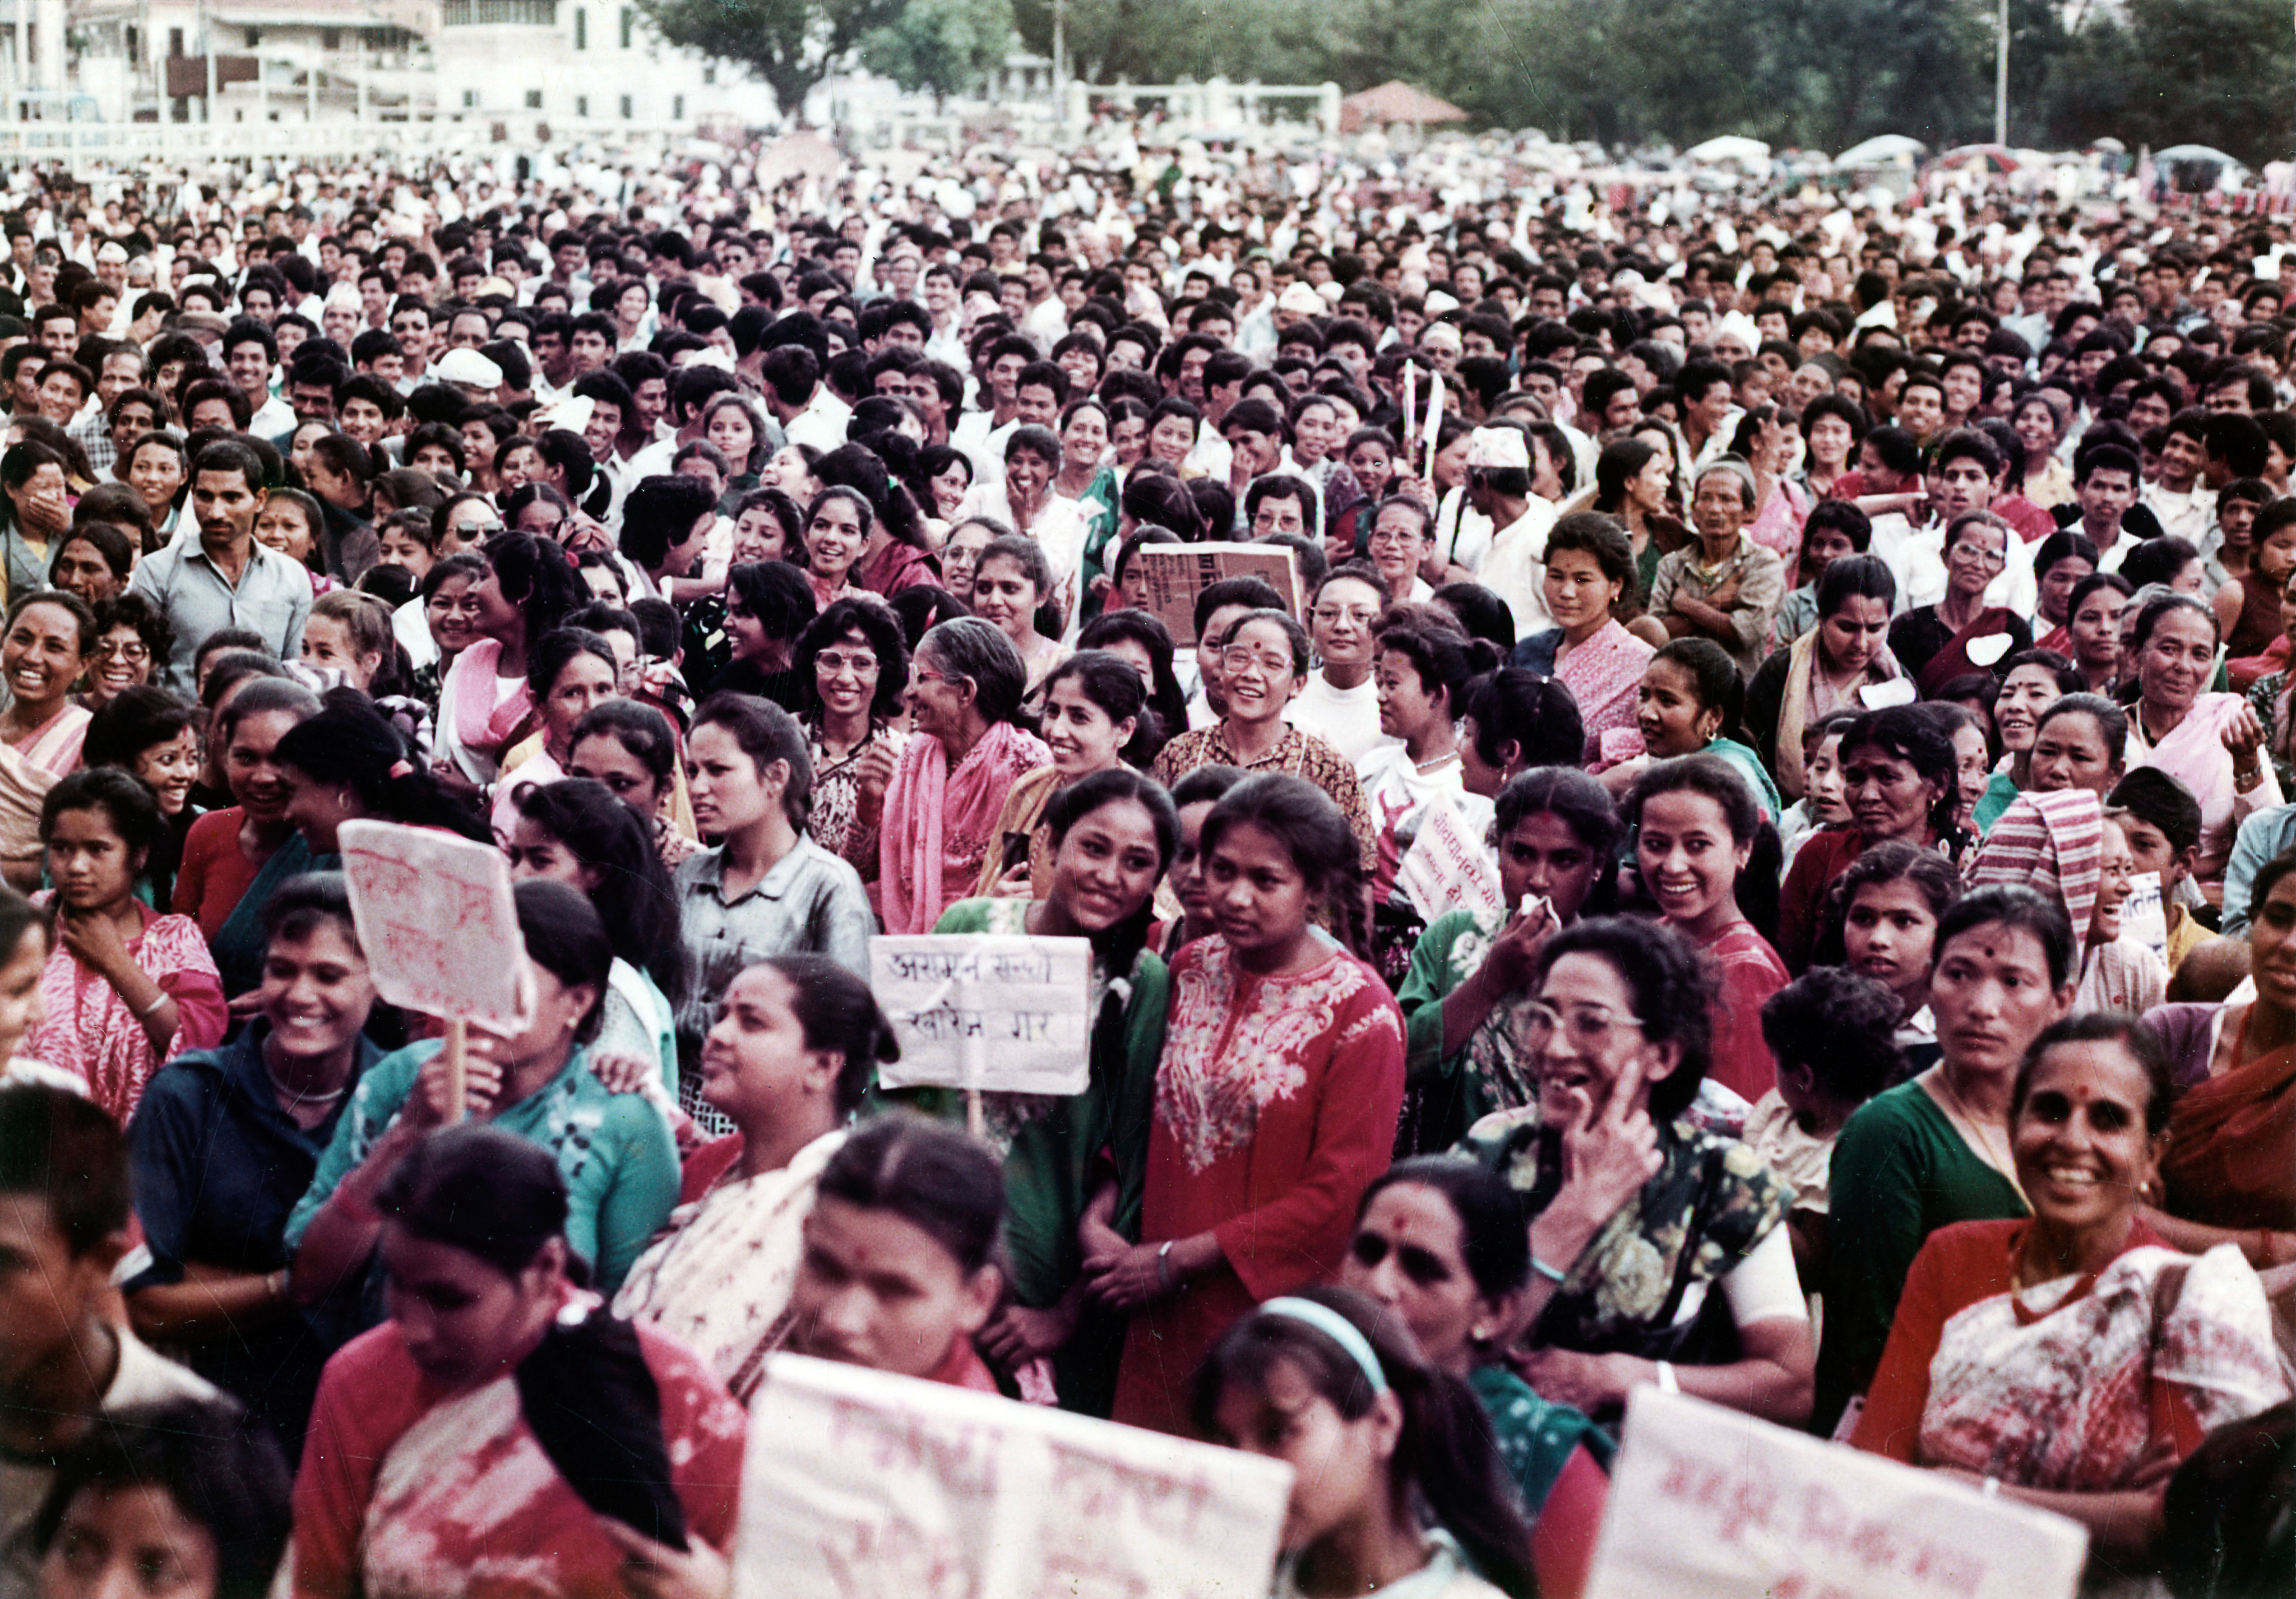 Women gather in Kathmandu in 1981 to protest against the rape and murder of sisters Namita and Sunita Bhandari in Pokhara. Photo: Handout/Hisila Yami Collection